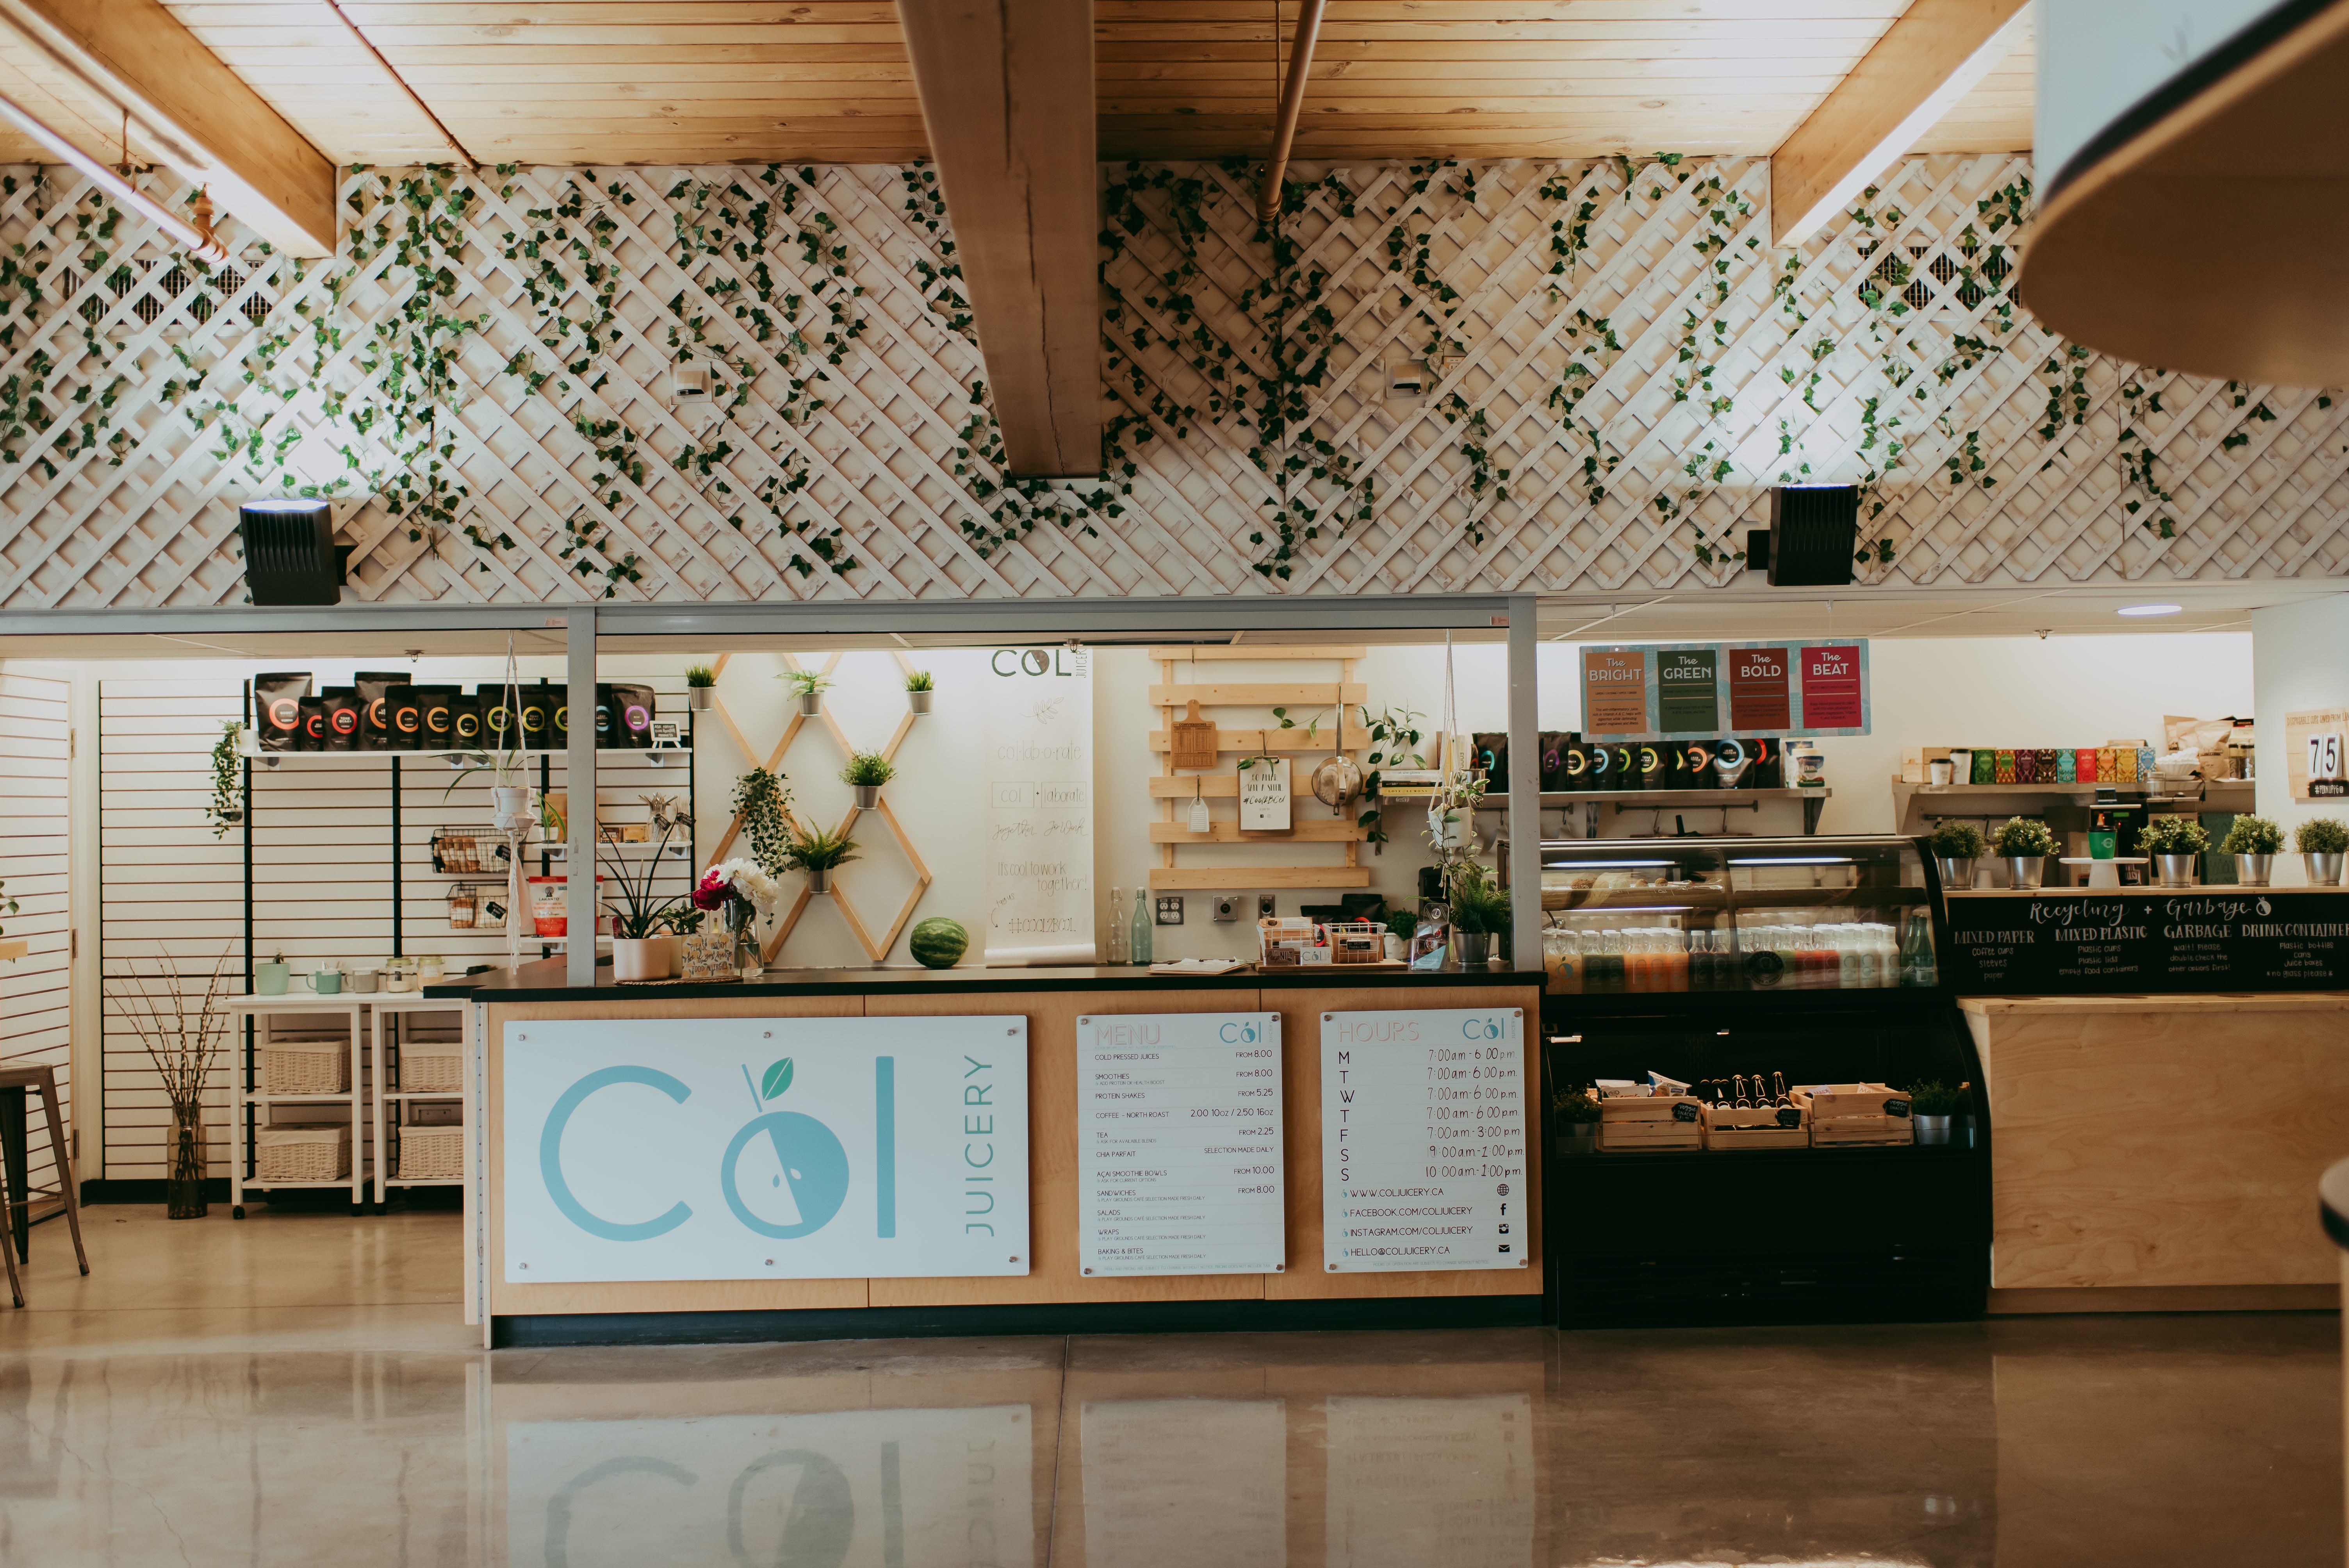 Col Juicery Juice and Smoothie Bar 